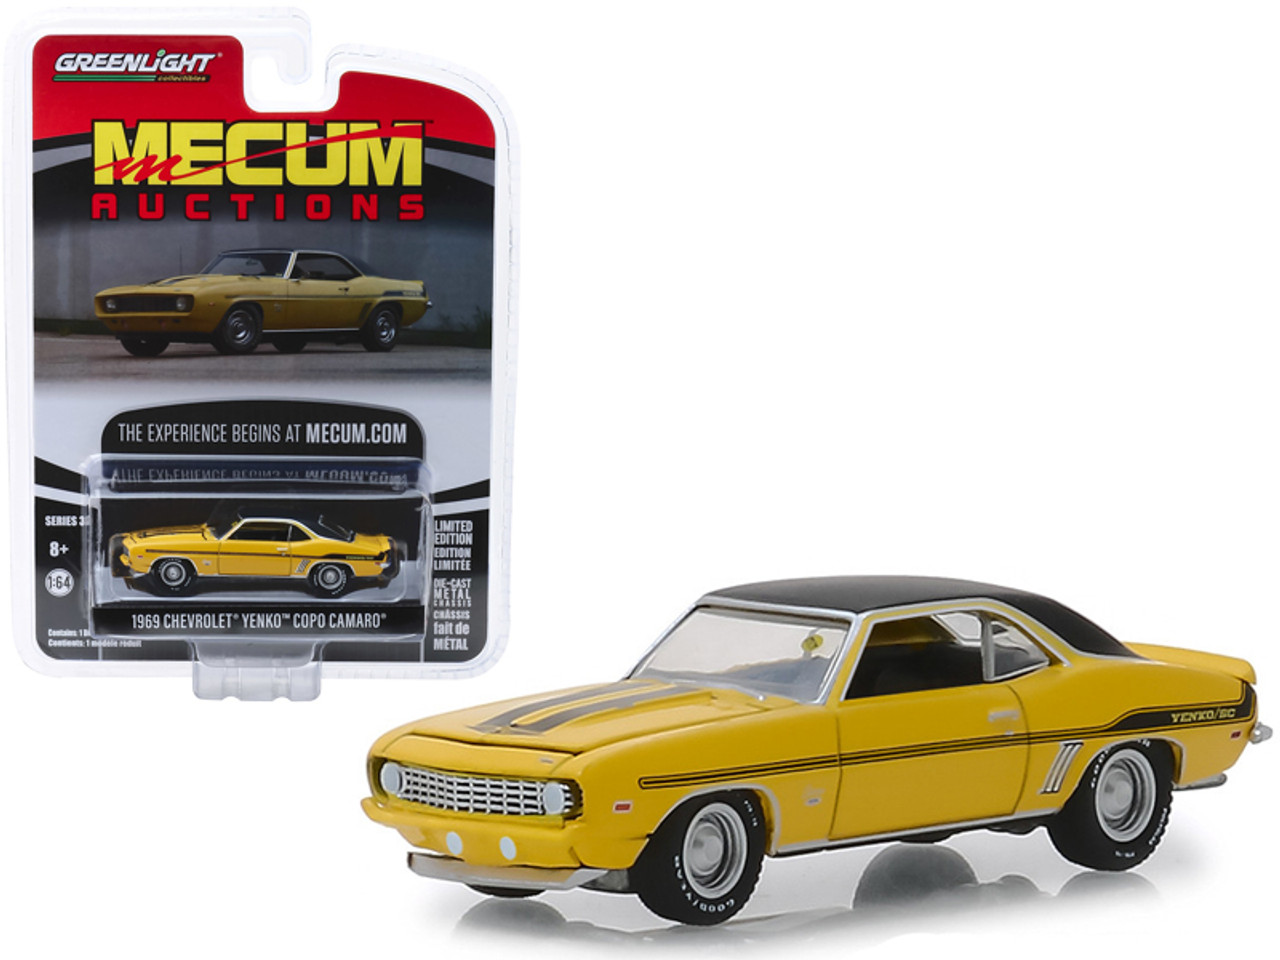 1/64 Greenlight 1969 Chevrolet Yenko/SC COPO Camaro Daytona Yellow with Black Top and Stripes (Chicago 2018) "Mecum Auctions Collector Cars" Series 3 Diecast Car Model